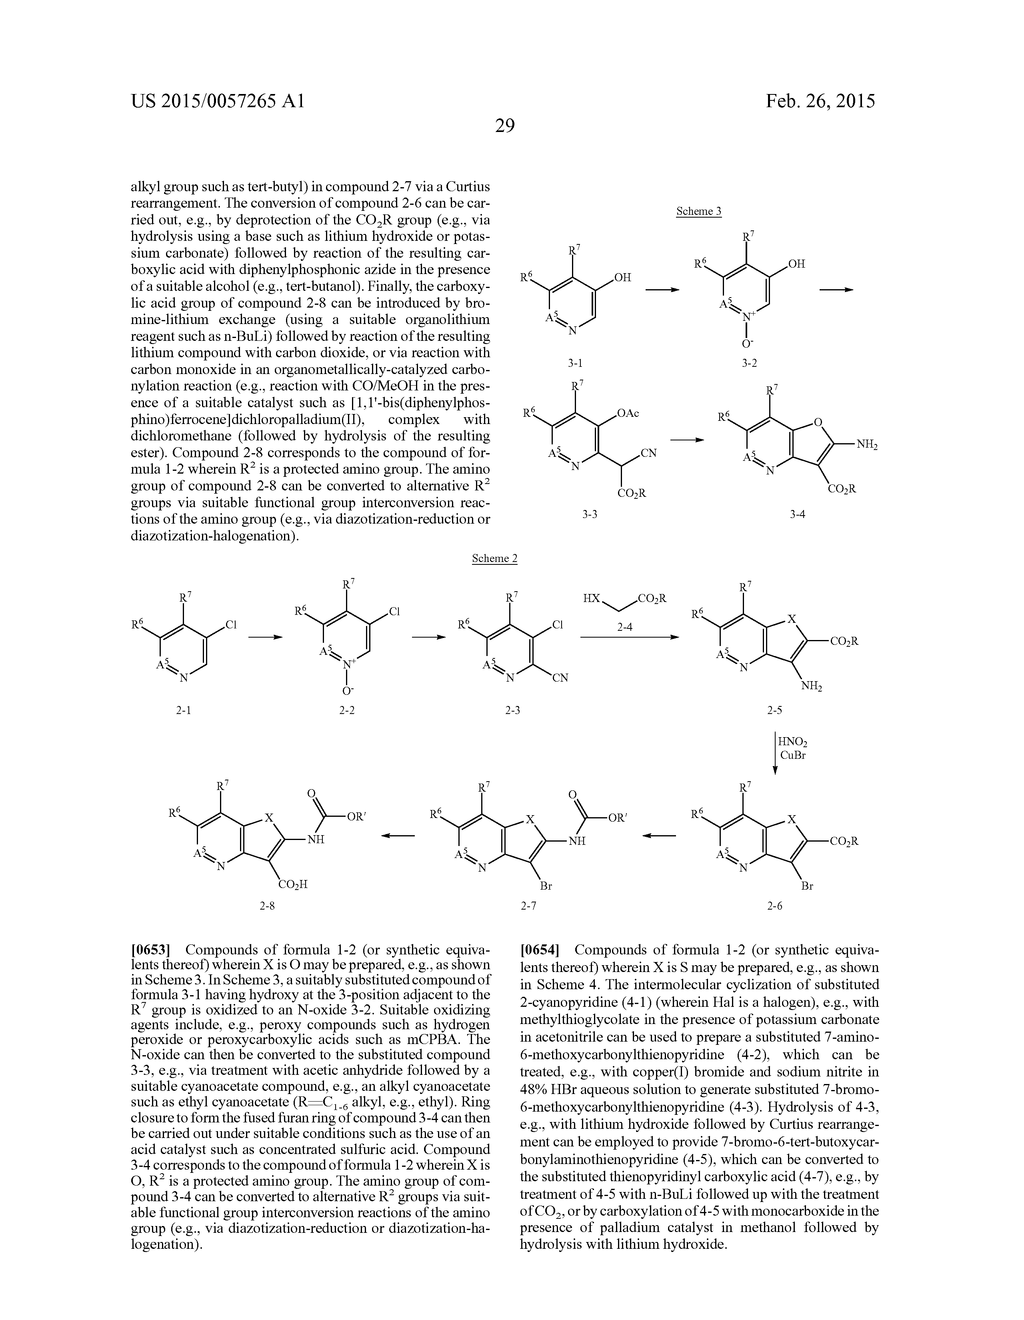 FURO- AND THIENO-PYRIDINE CARBOXAMIDE COMPOUNDS USEFUL AS PIM KINASE     INHIBITORS - diagram, schematic, and image 30